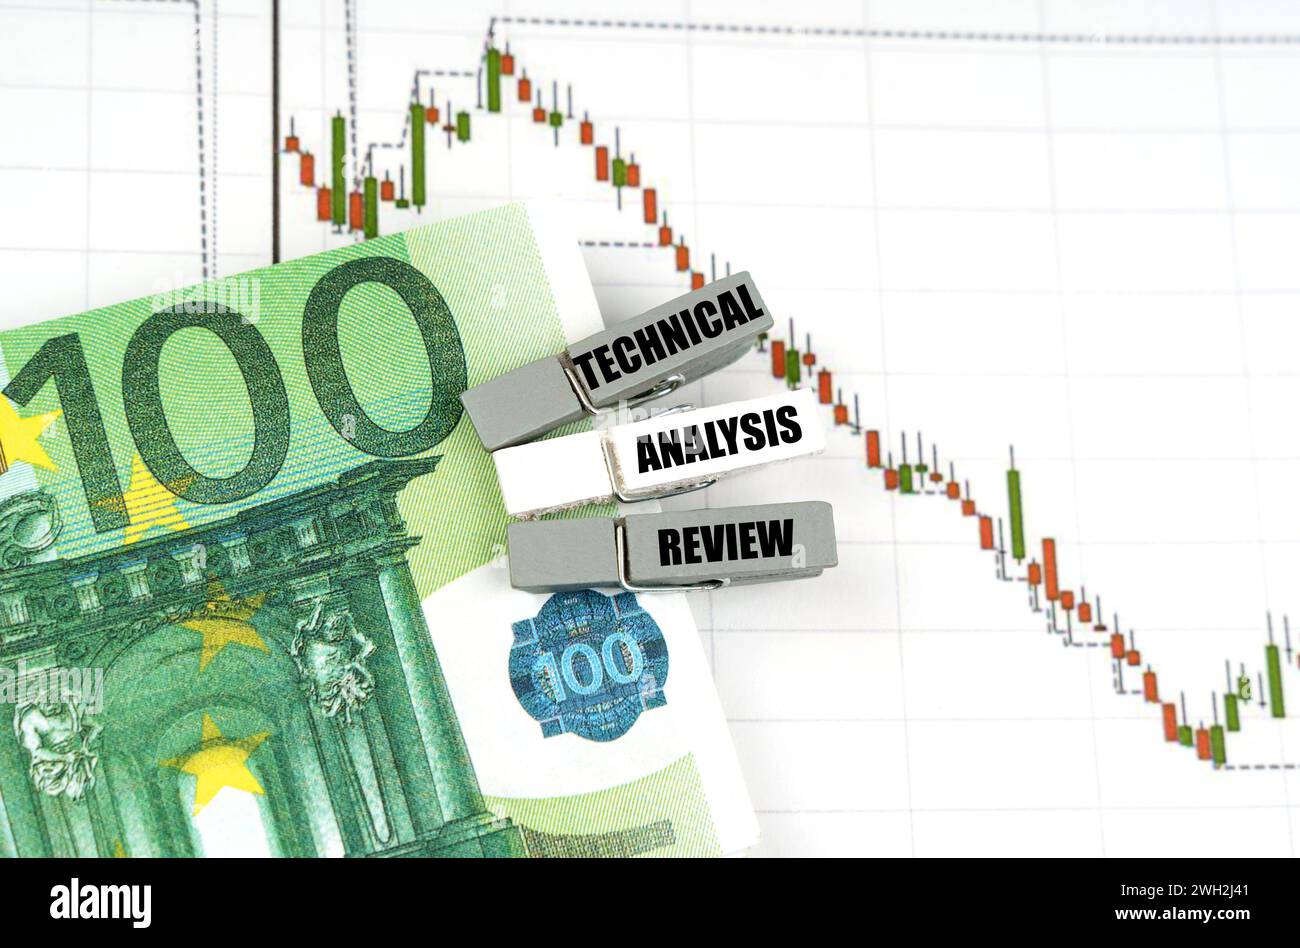 Business concept. On the quote chart there are euros and clothespins with the inscription - Technical Analysis Review Stock Photo